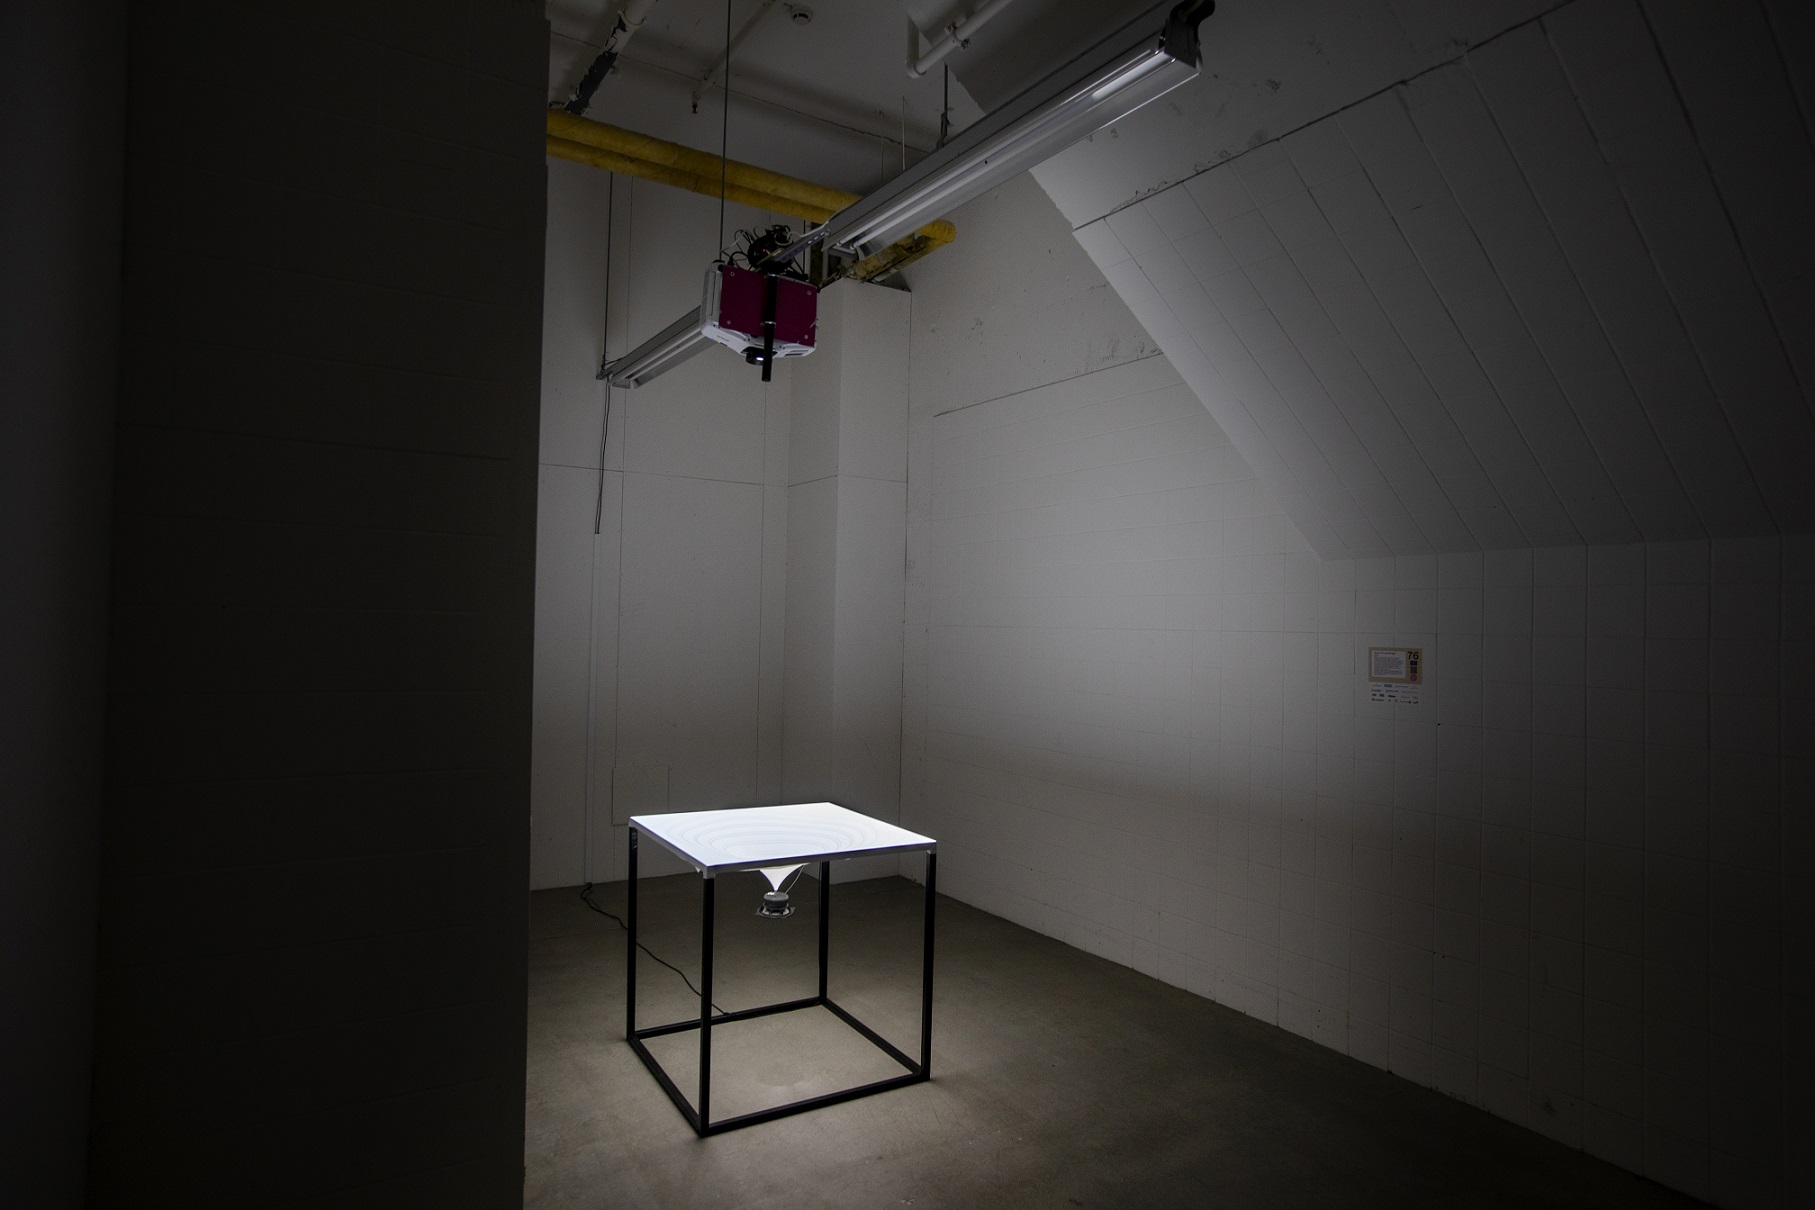 In the corner of a dark room stands a white table with a depth in it, which means that the surface of the table becomes conformal down to and at the bottom sits a lens. A projector hangs from the ceiling above and shines down on the table.